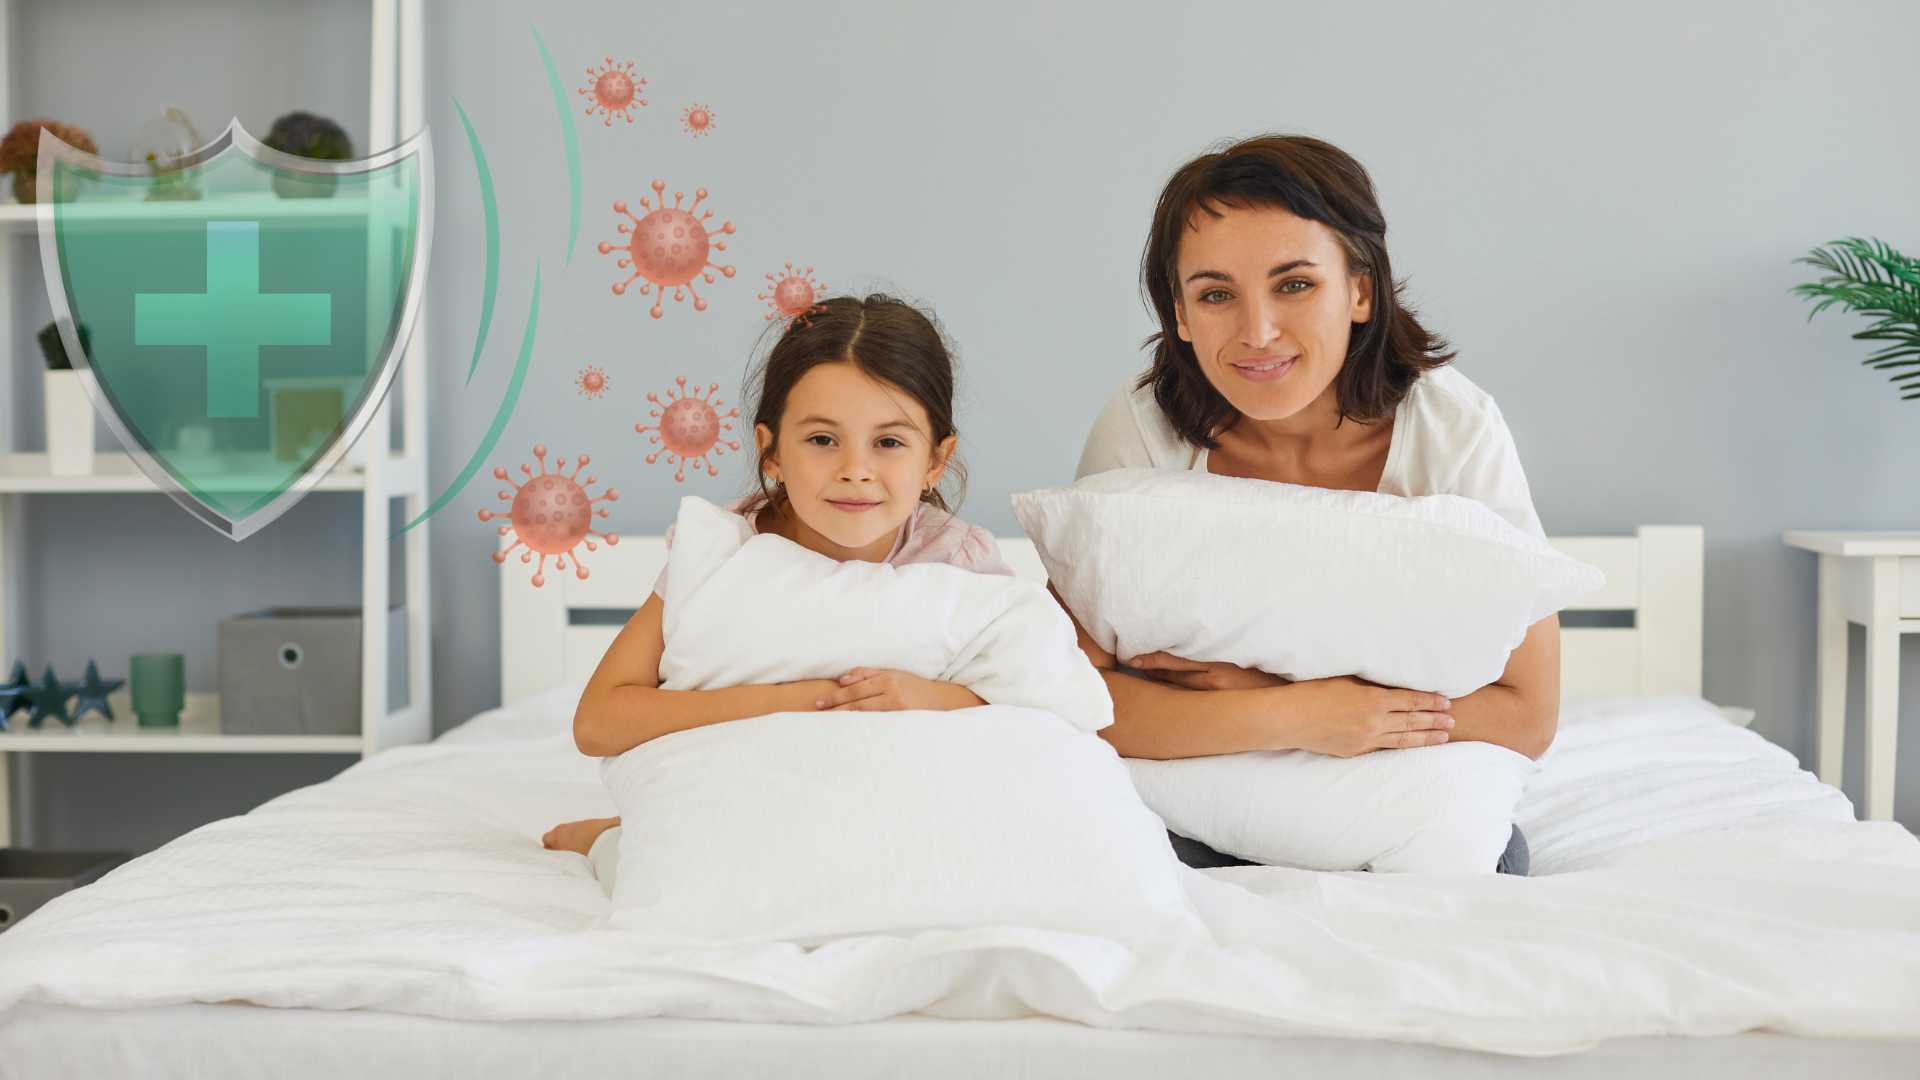 Banner showcasing the Viroclean® Mattress and Toppers, the first-ever bedding solutions designed to protect against COVID with advanced antiviral and antibacterial technology.